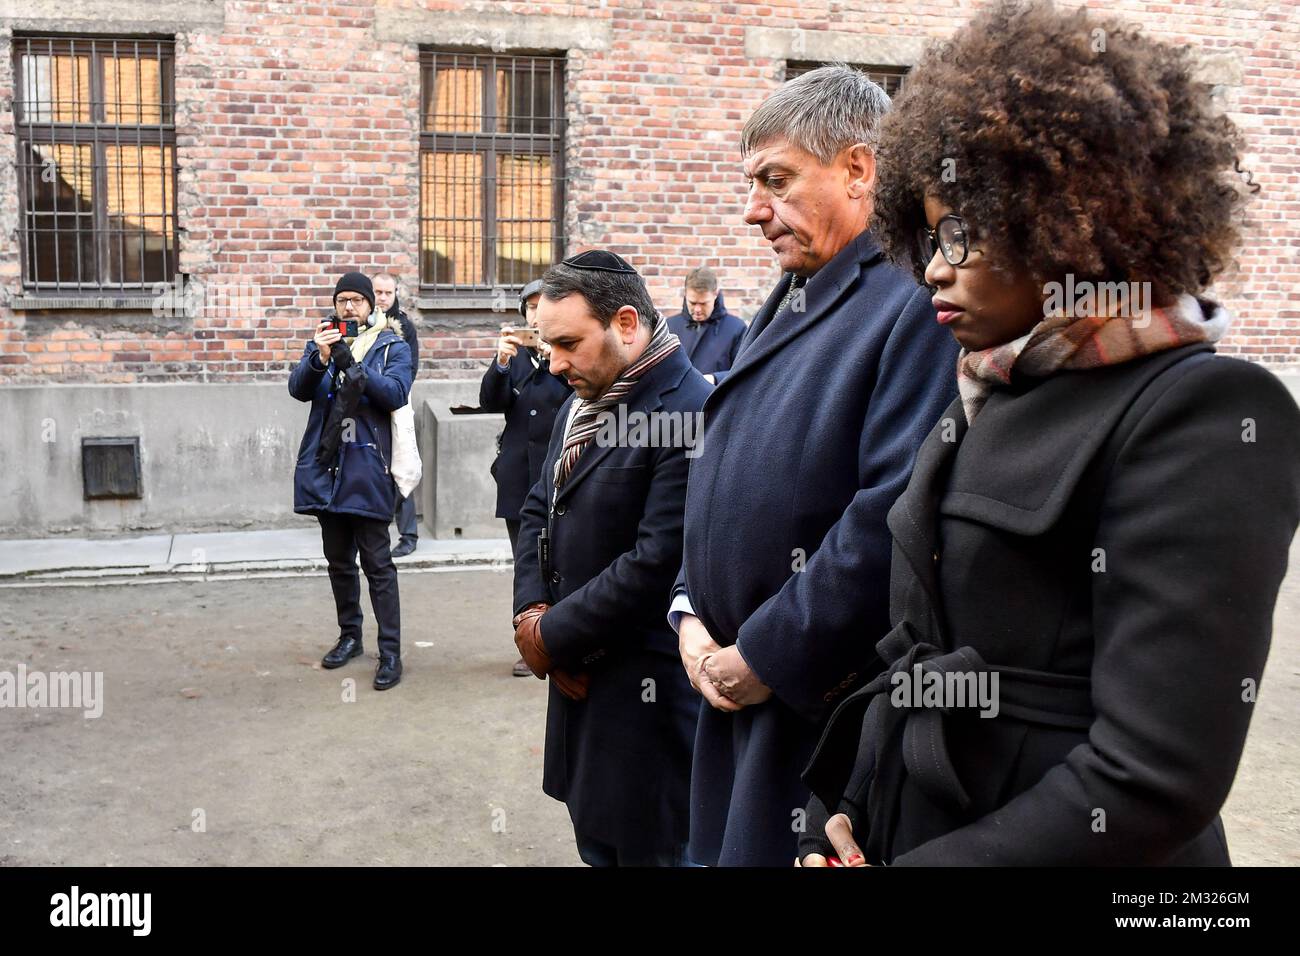 N-VA chamber member Michael Freilich, Flemish Minister President Jan Jambon and N-VA European MP Assita Kanko pictured during a memorial to commemorate the 75th anniversary of the liberation of the Auschwitz-Birkenau World War II concentration camp in Oswiecim, Poland, Tuesday 21 January 2020. BELGA PHOTO DIRK WAEM Stock Photo